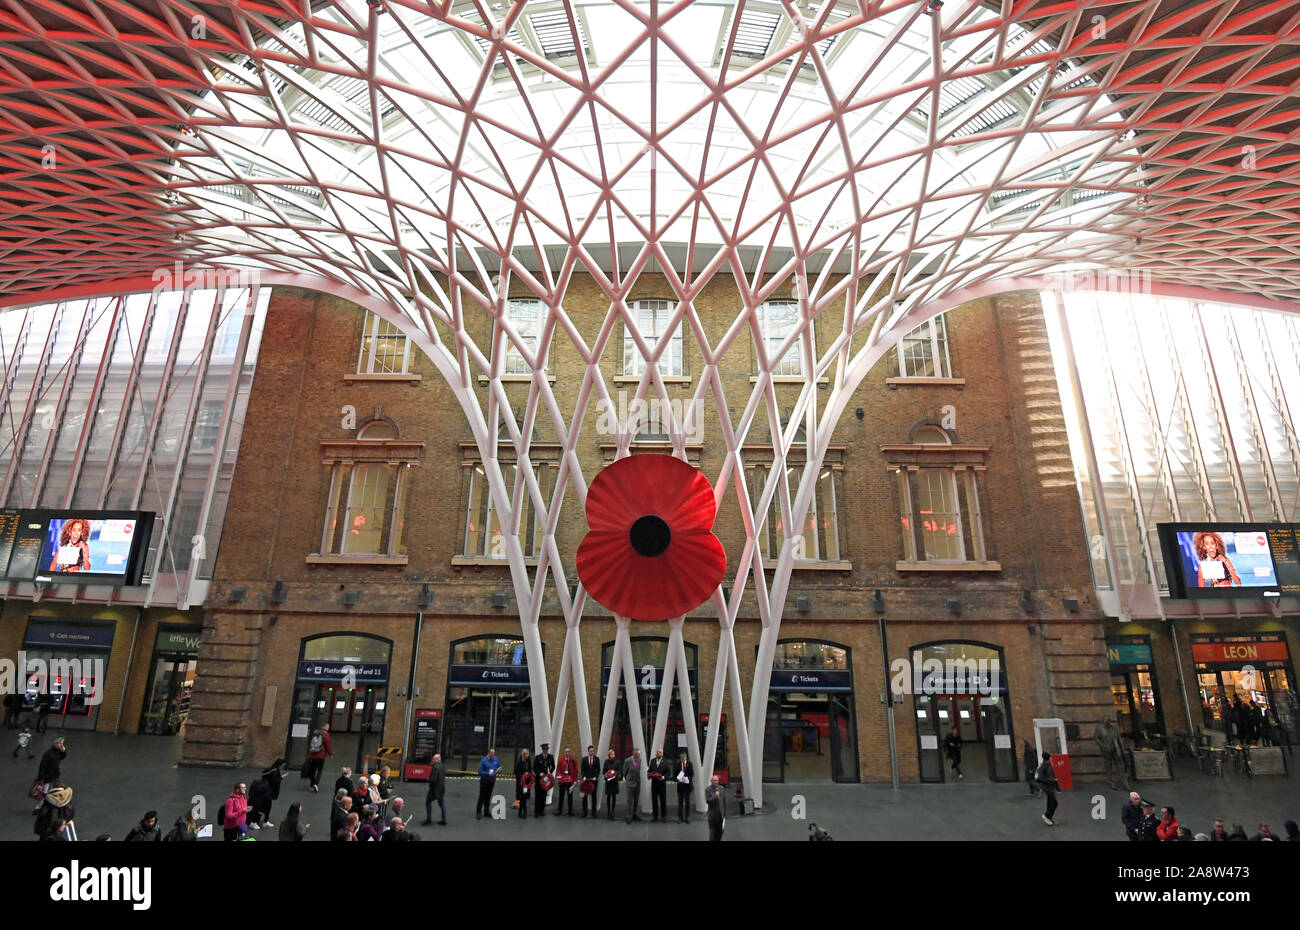 A large model of a poppy on display at King's Cross St. Pancras Station in London, as people observe a silence to mark Armistice Day, the anniversary of the end of the First World War. Stock Photo